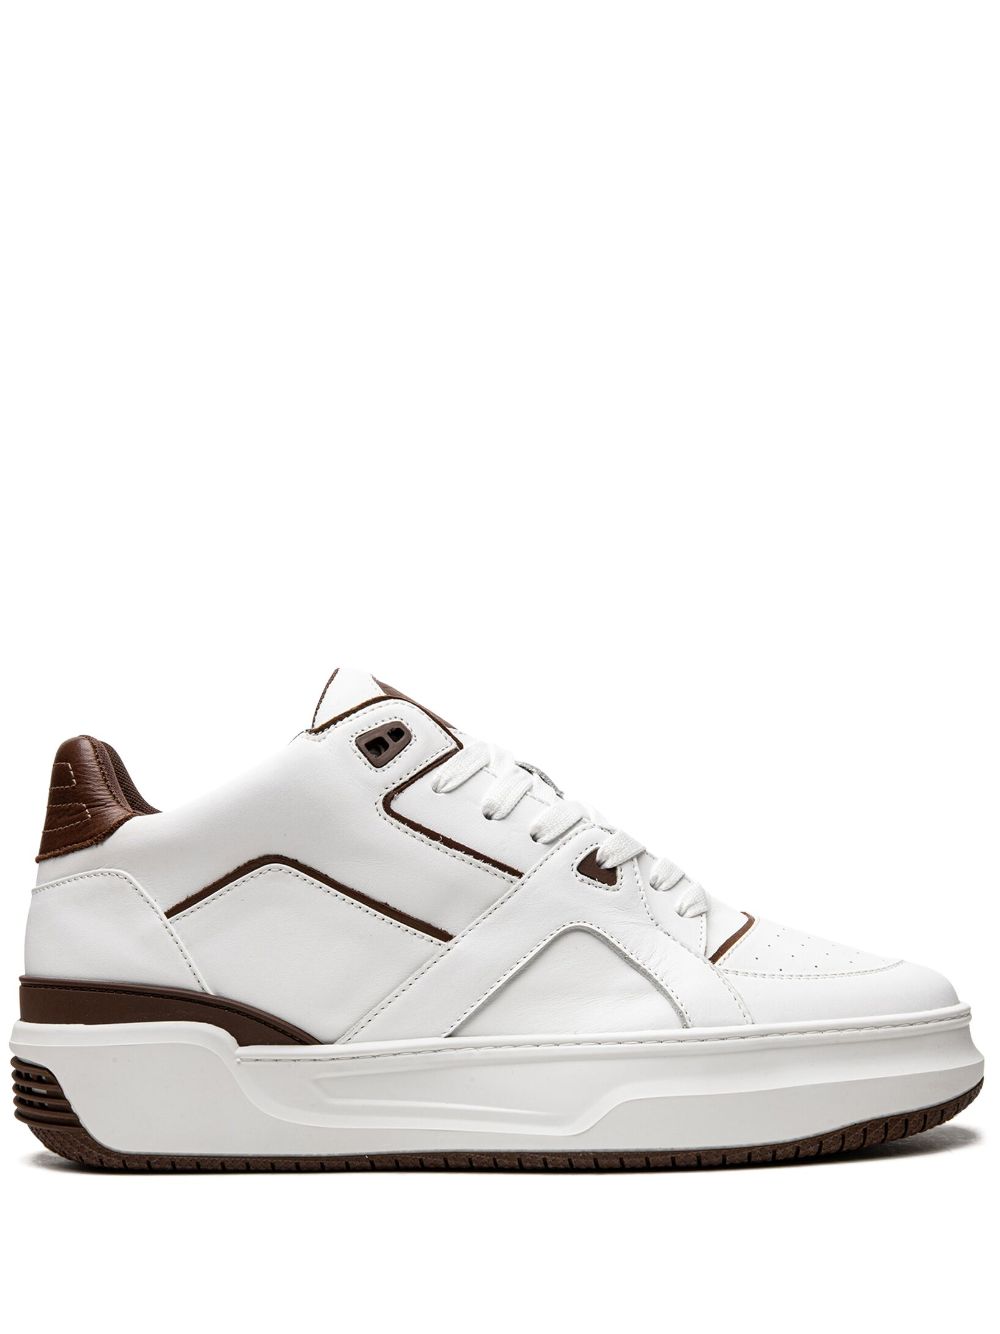 Just Don Courtside Low "White/Burgundy" sneakers von Just Don